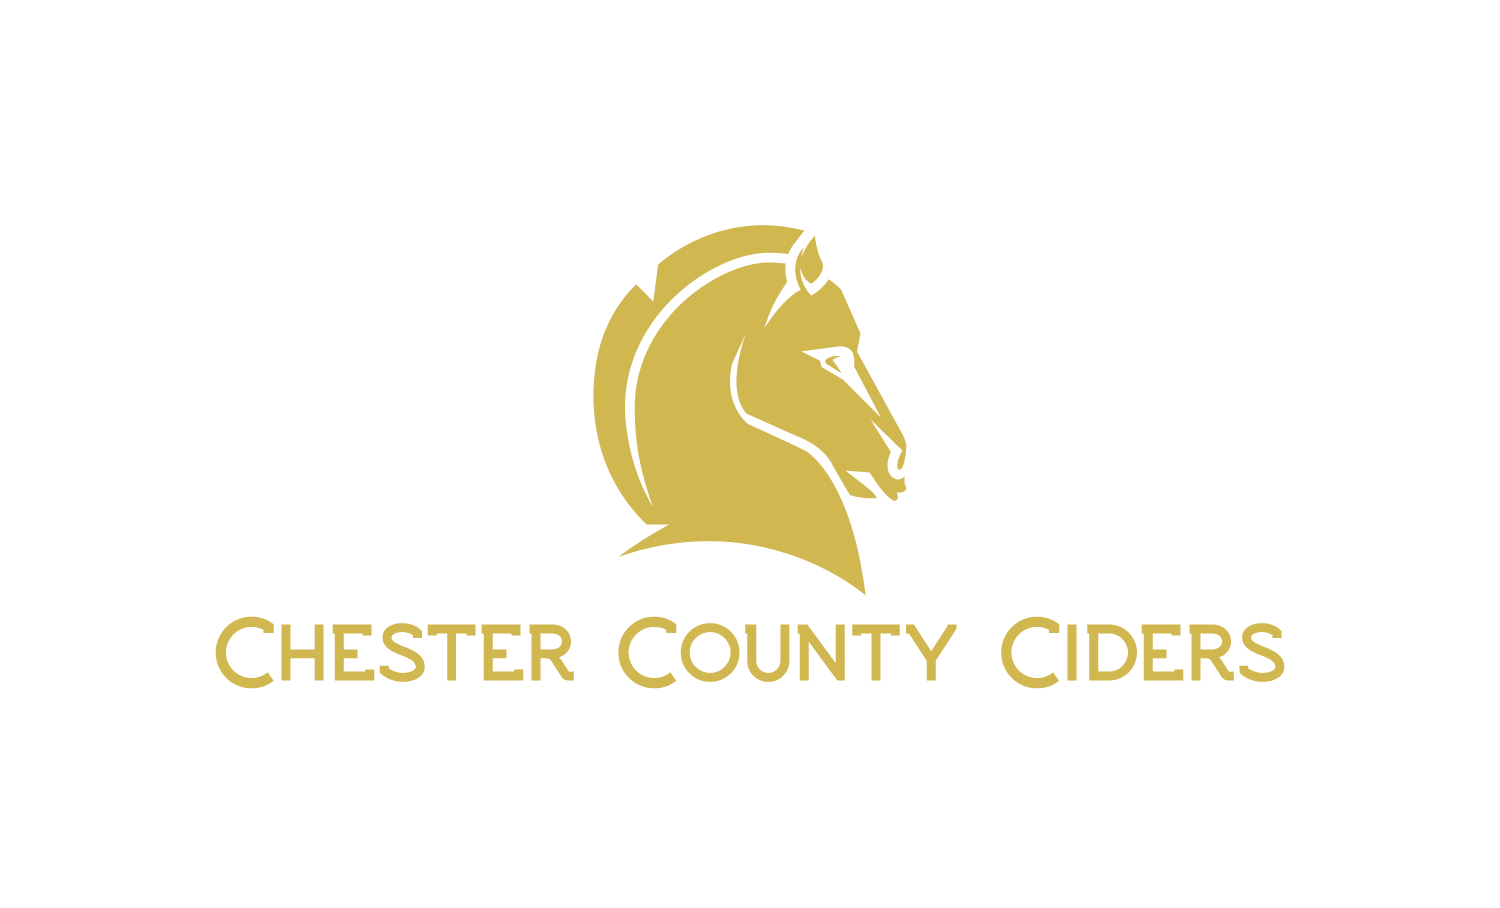 Chester County Ciders